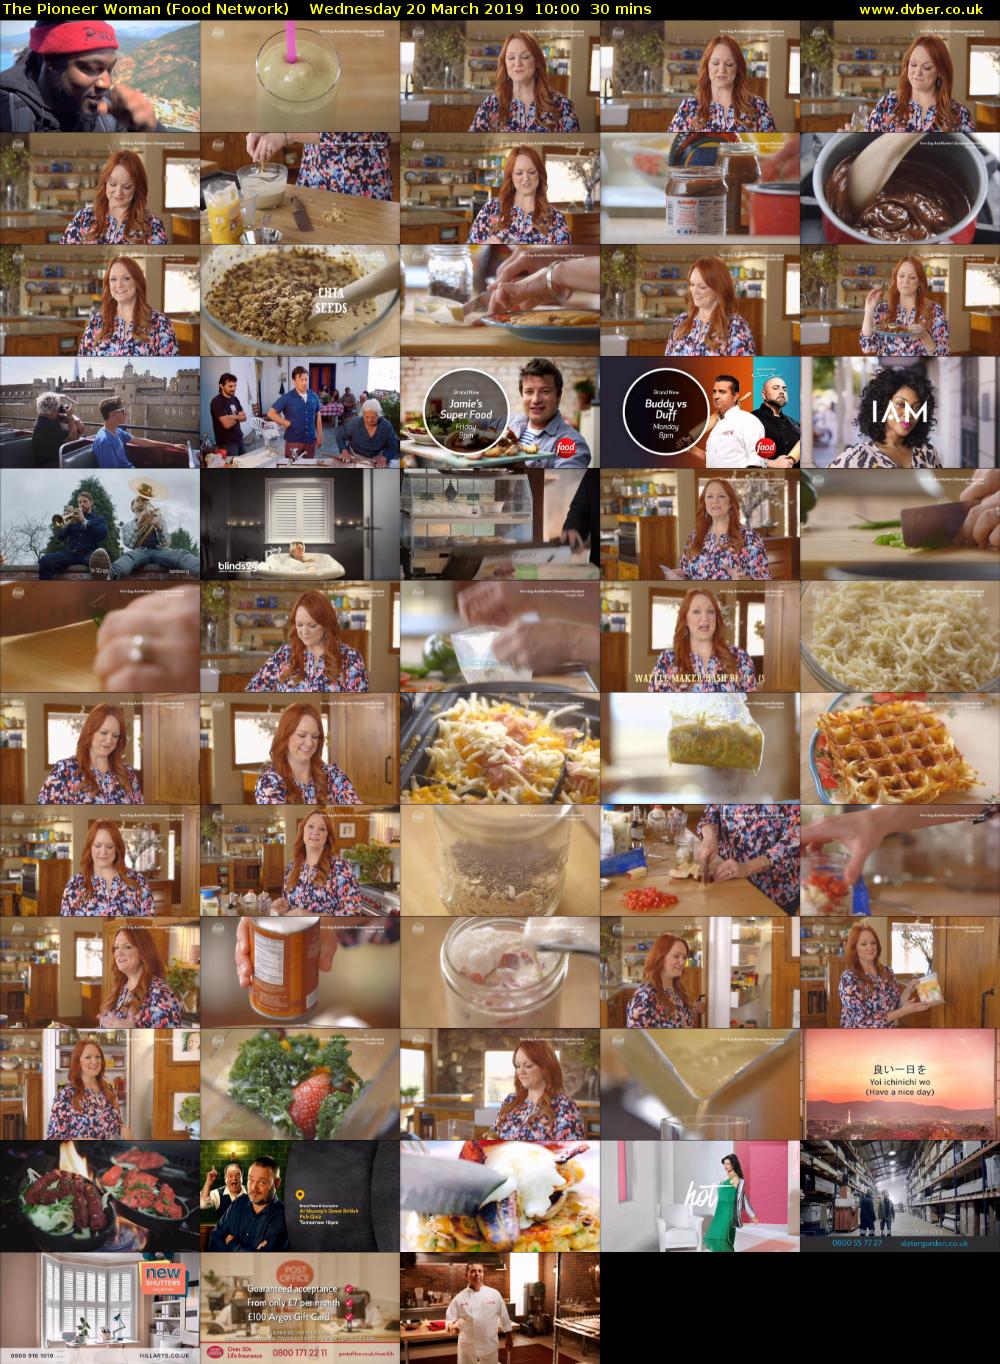 The Pioneer Woman (Food Network) Wednesday 20 March 2019 10:00 - 10:30